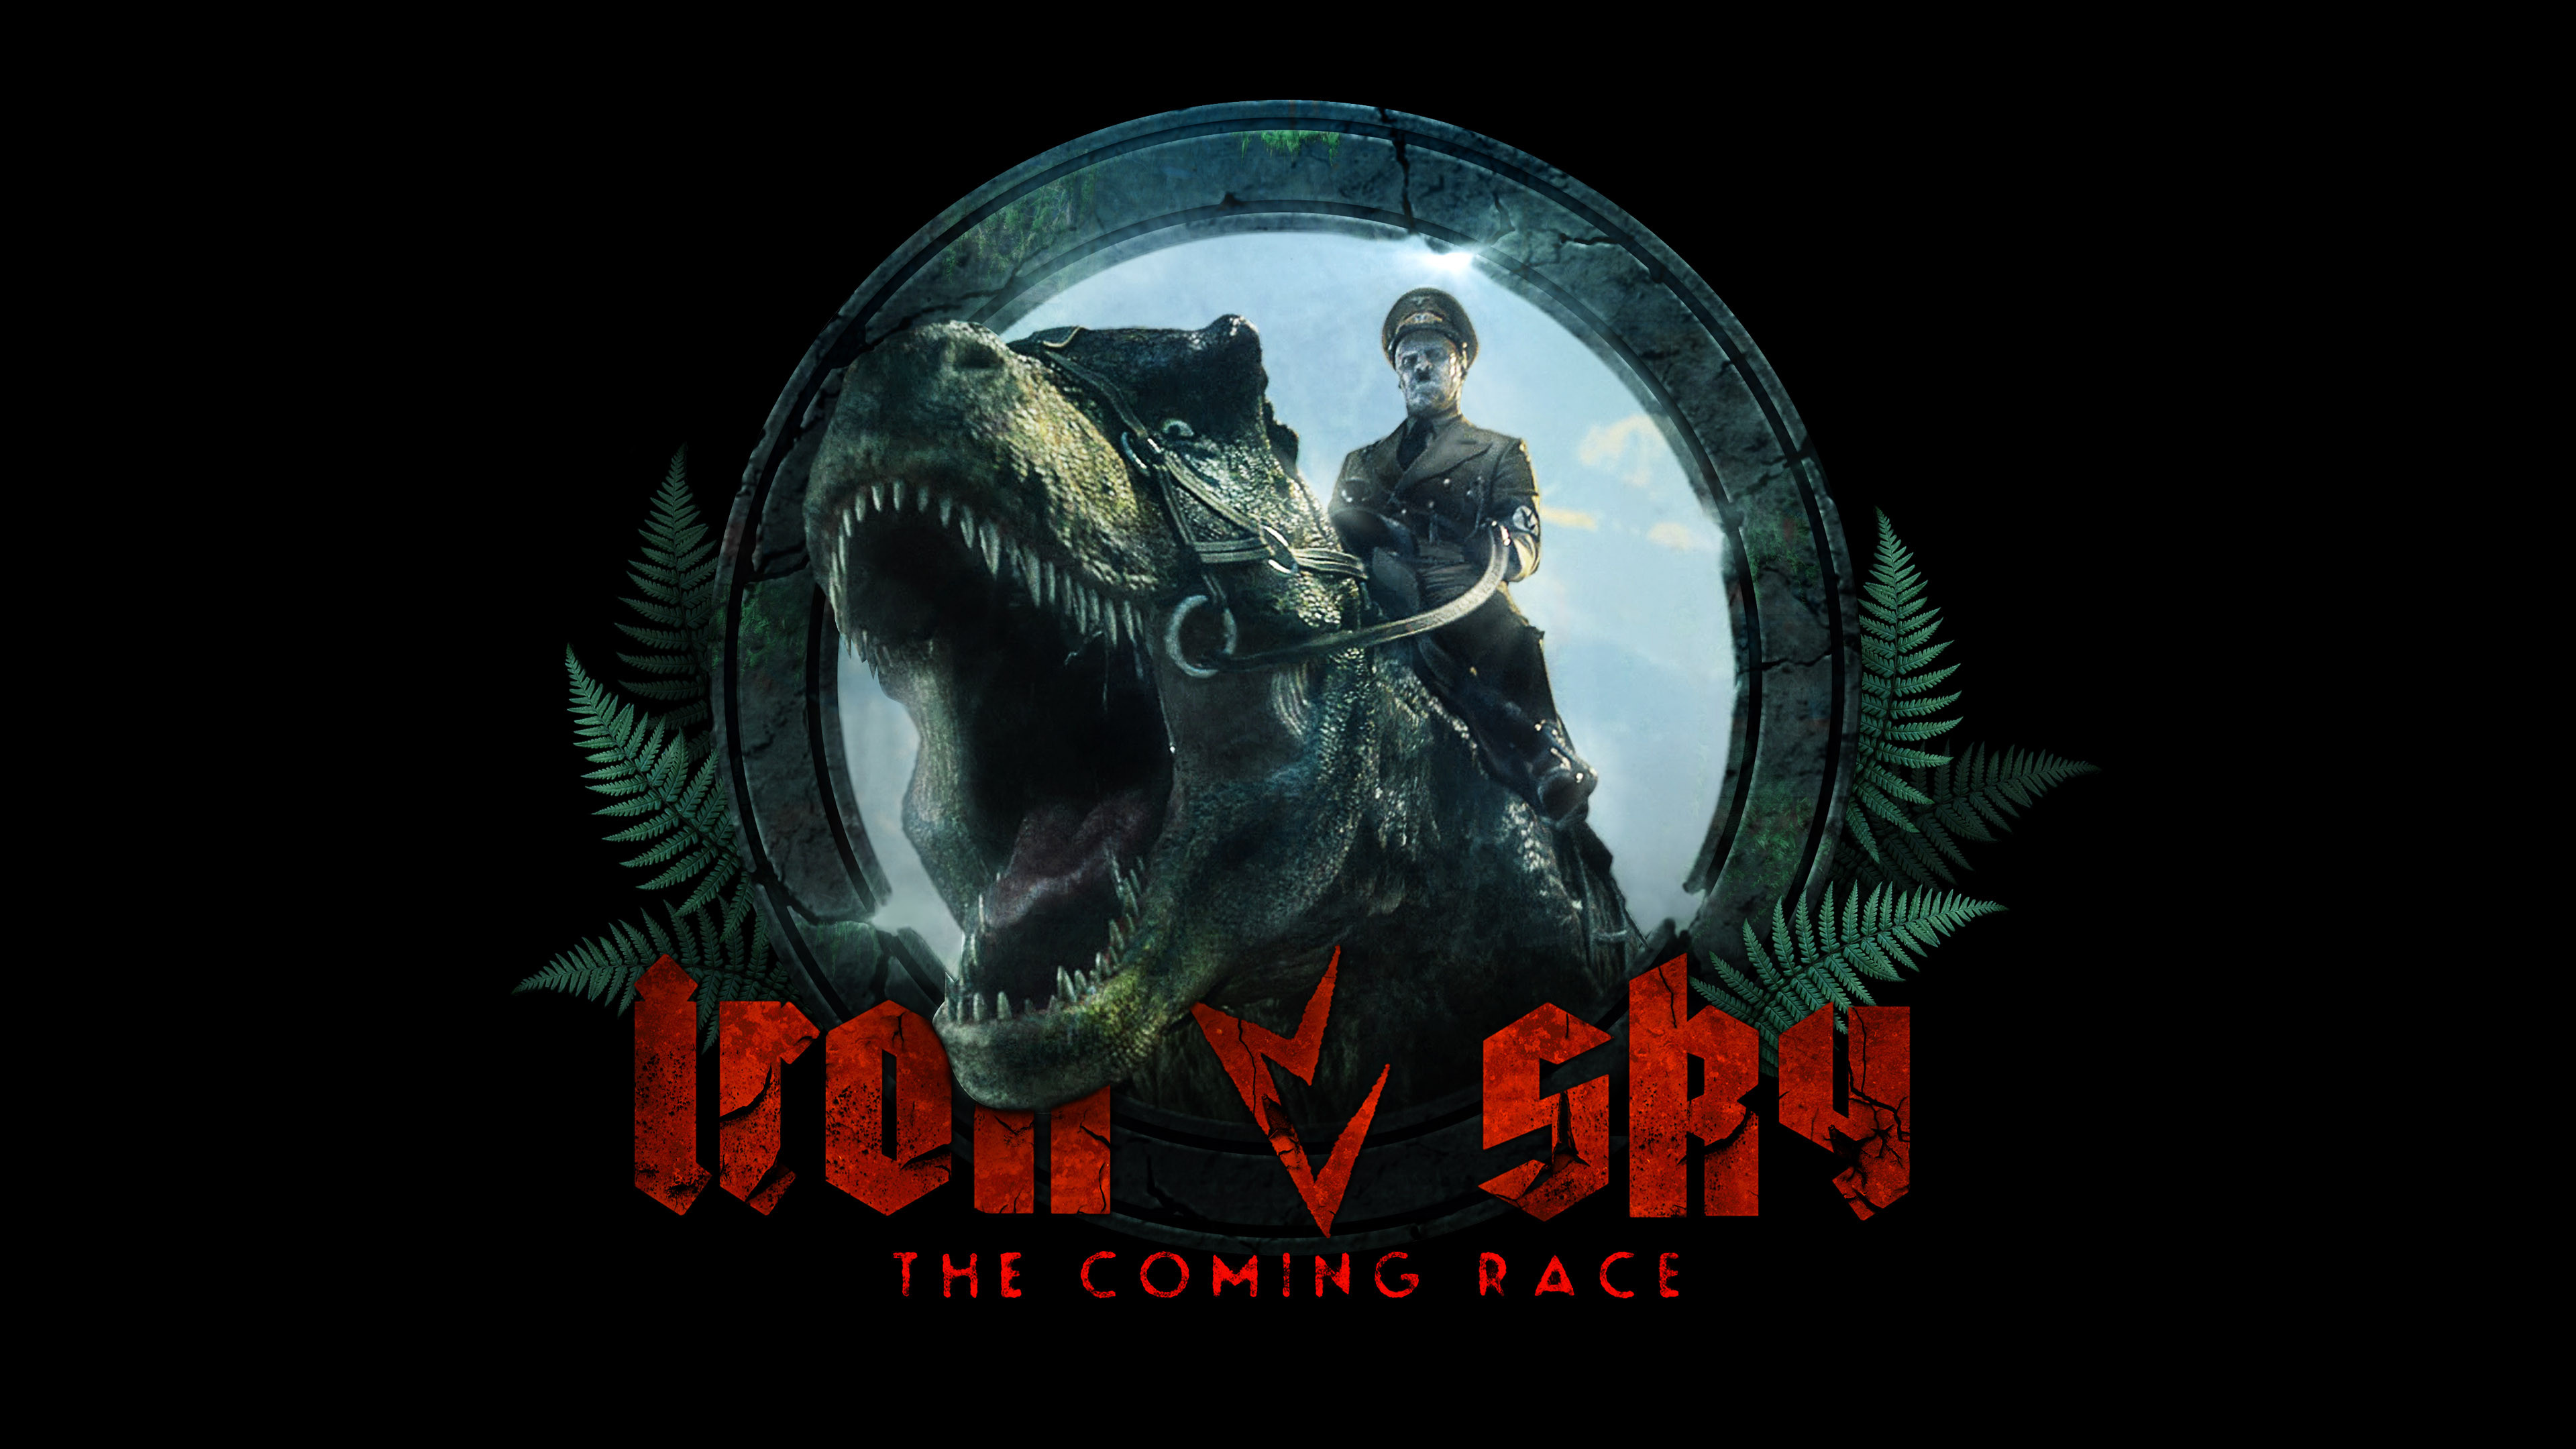 Wallpaper Iron Sky: The Coming Race, poster, 4k, Movies #159913840 x 2160